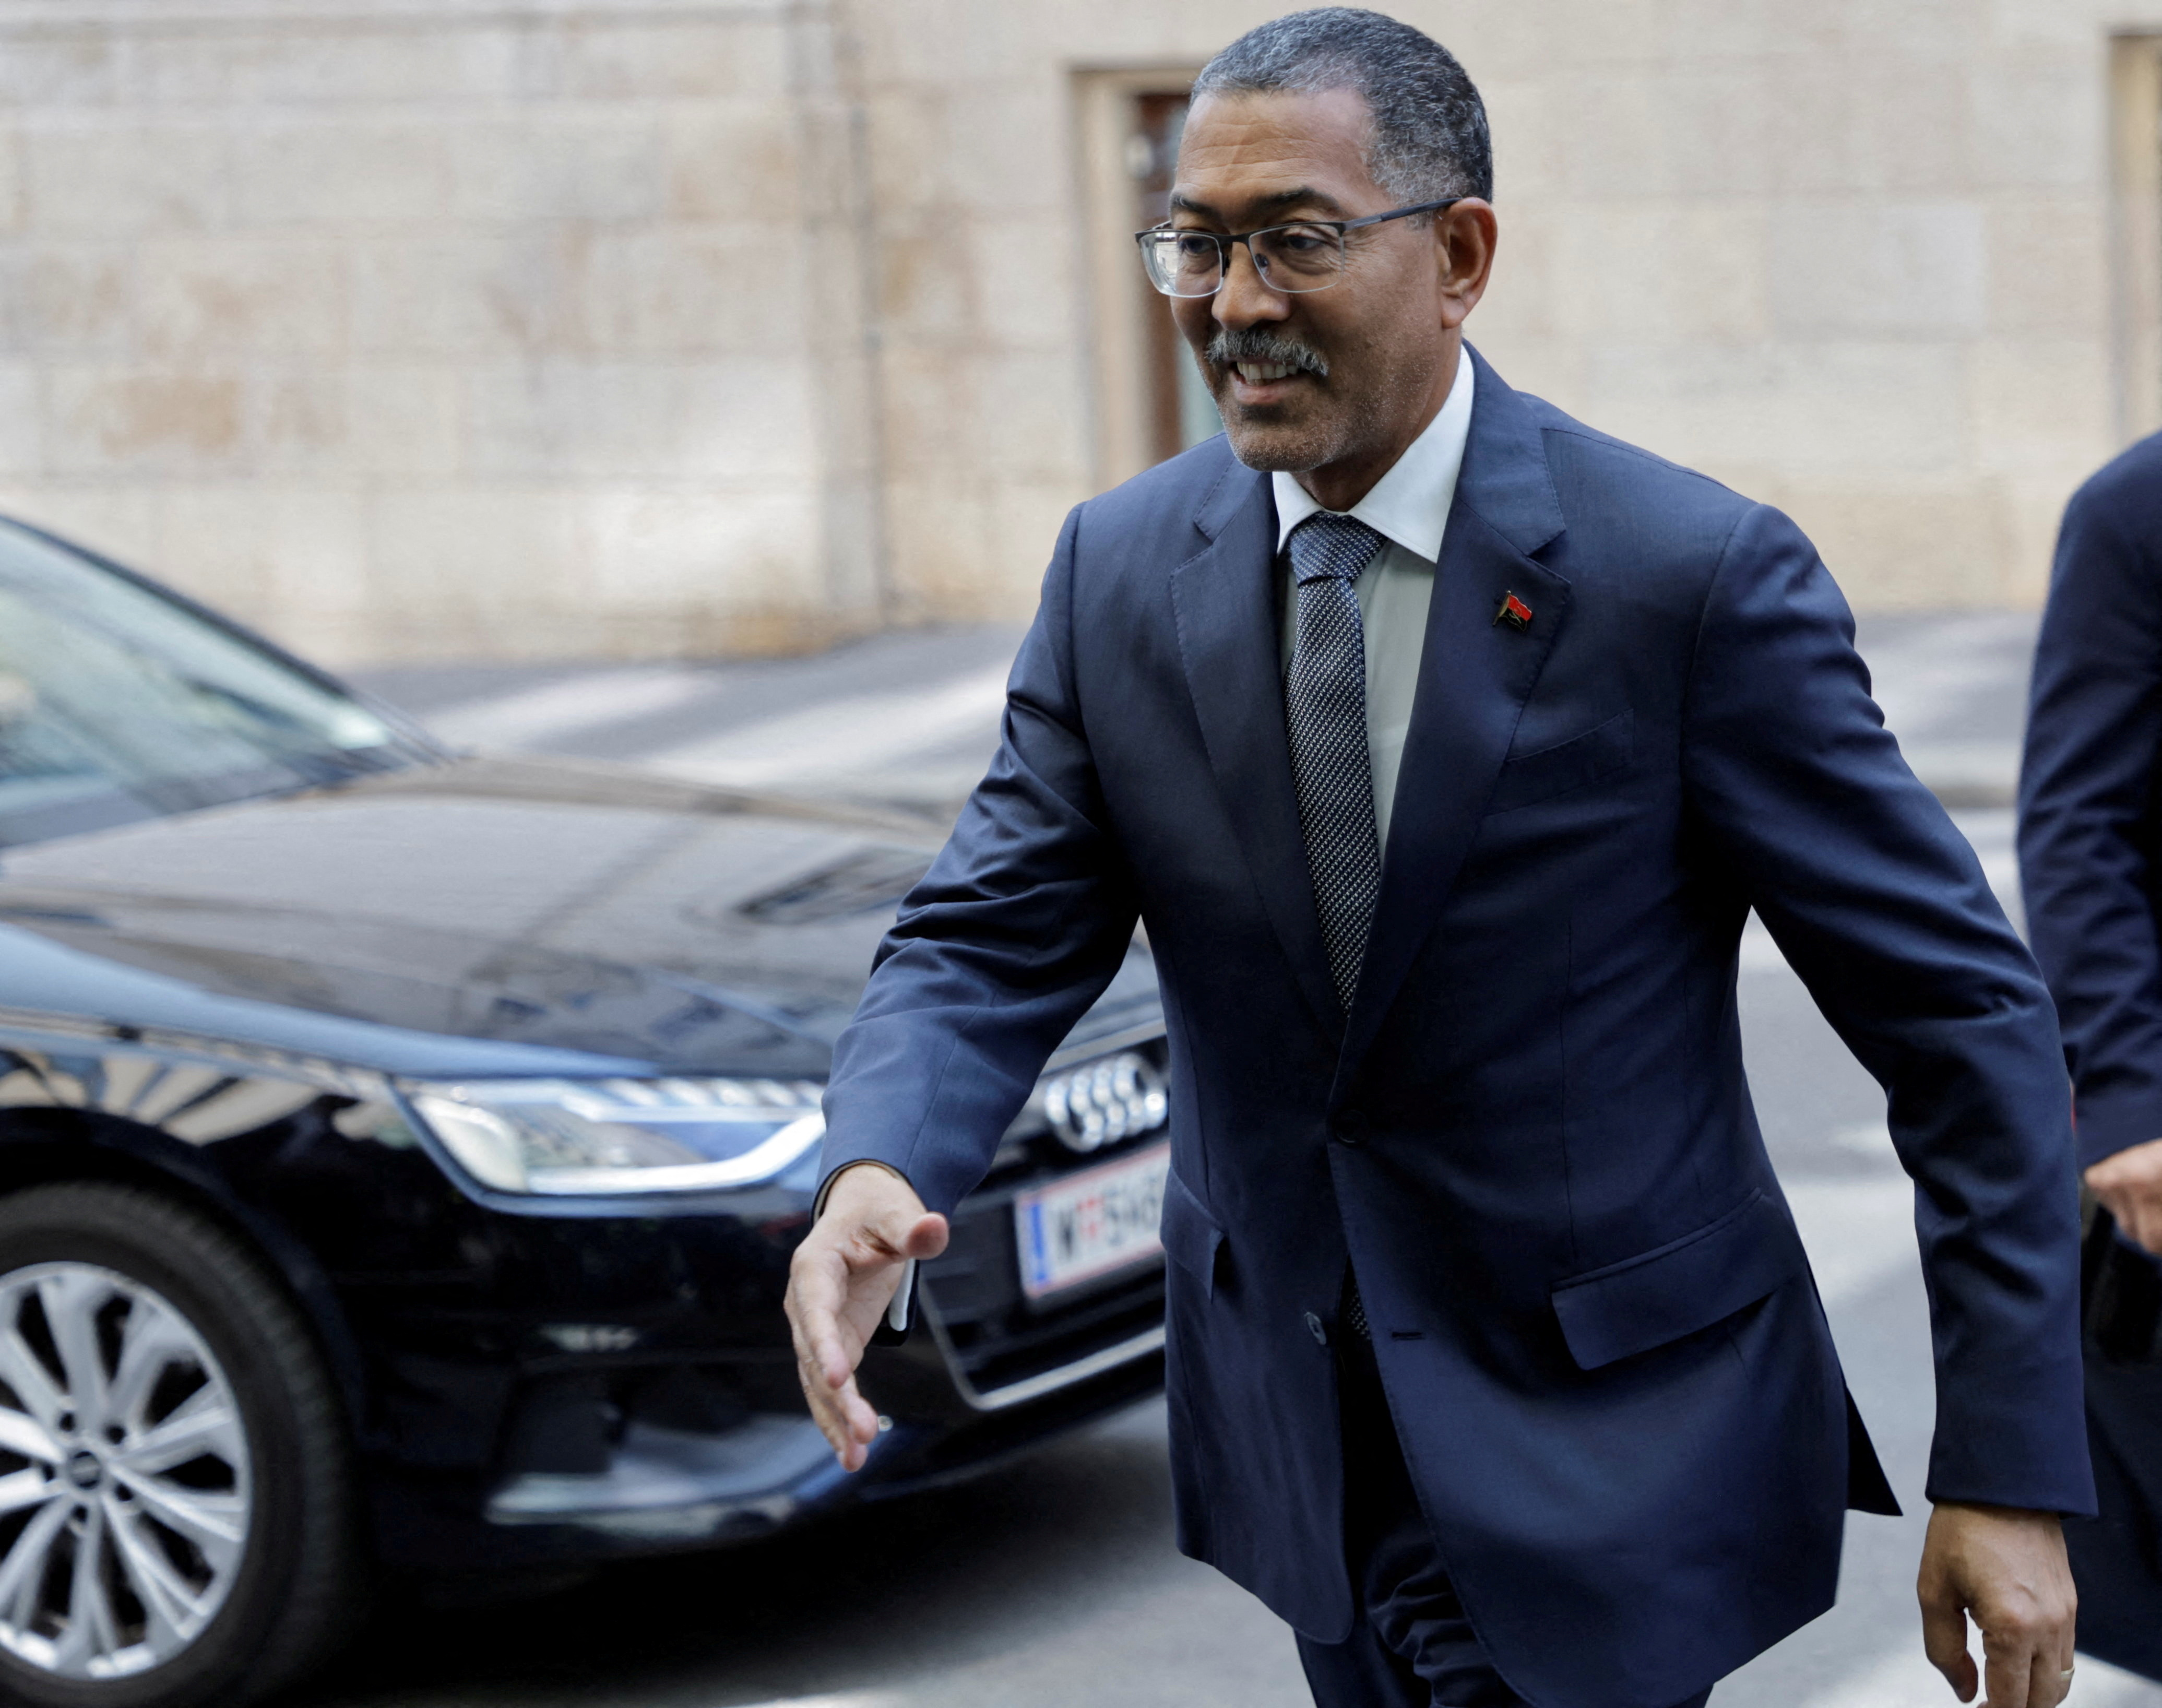 Angola's Minister of Mineral Resources, Petroleum and Gas Diamantino Pedro Azevedo arrives at the OPEC headquarters for meeting in Vienna